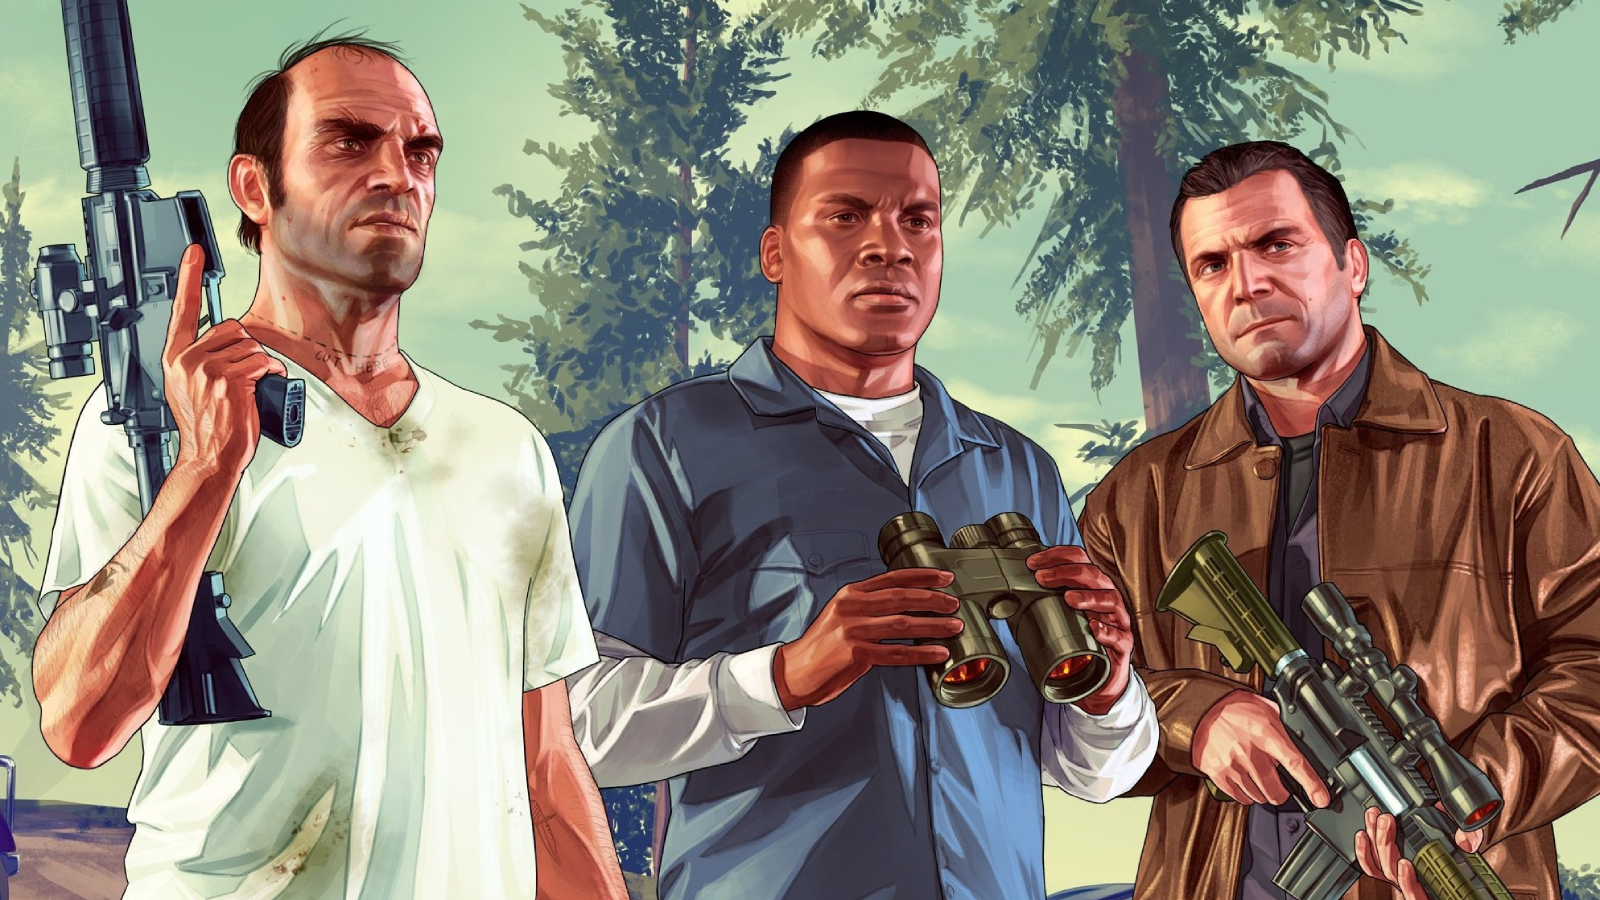 The cult game GTA 5 has undergone changes due to allegations of transphobia  - Free Press